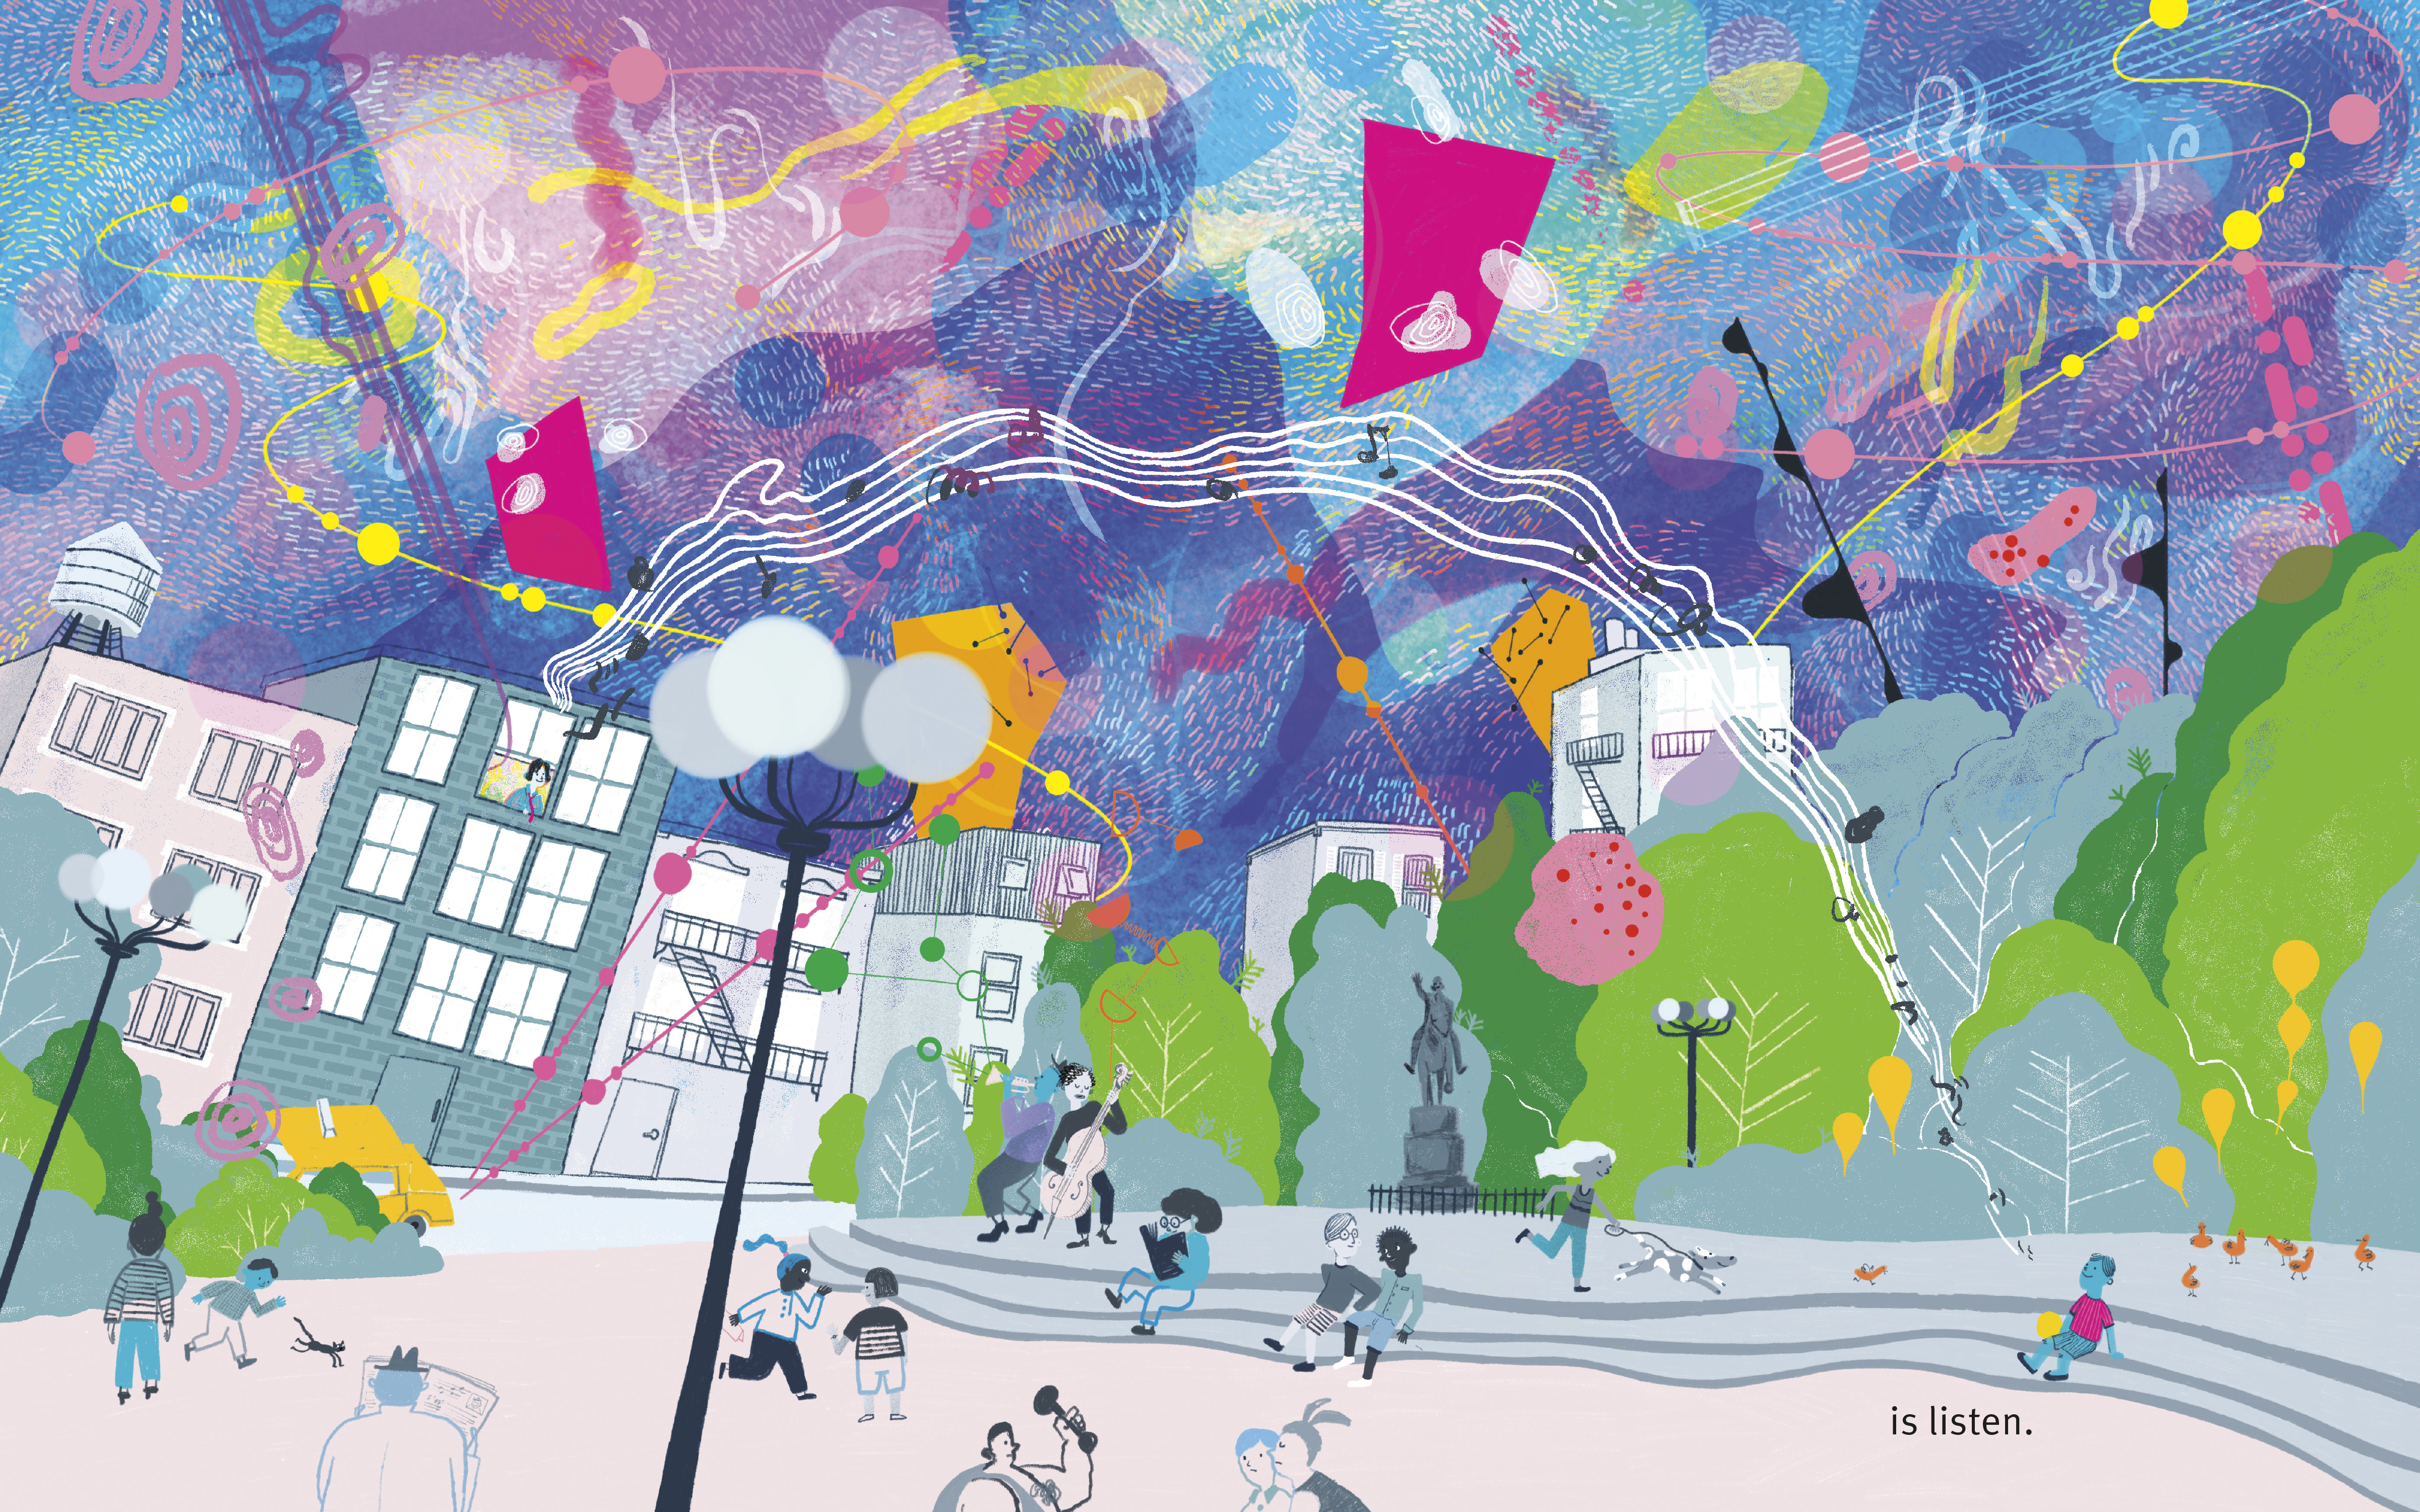 An interior image from Beautiful Noise featuring a city park scene below a vibrantly colored and patterned sky.